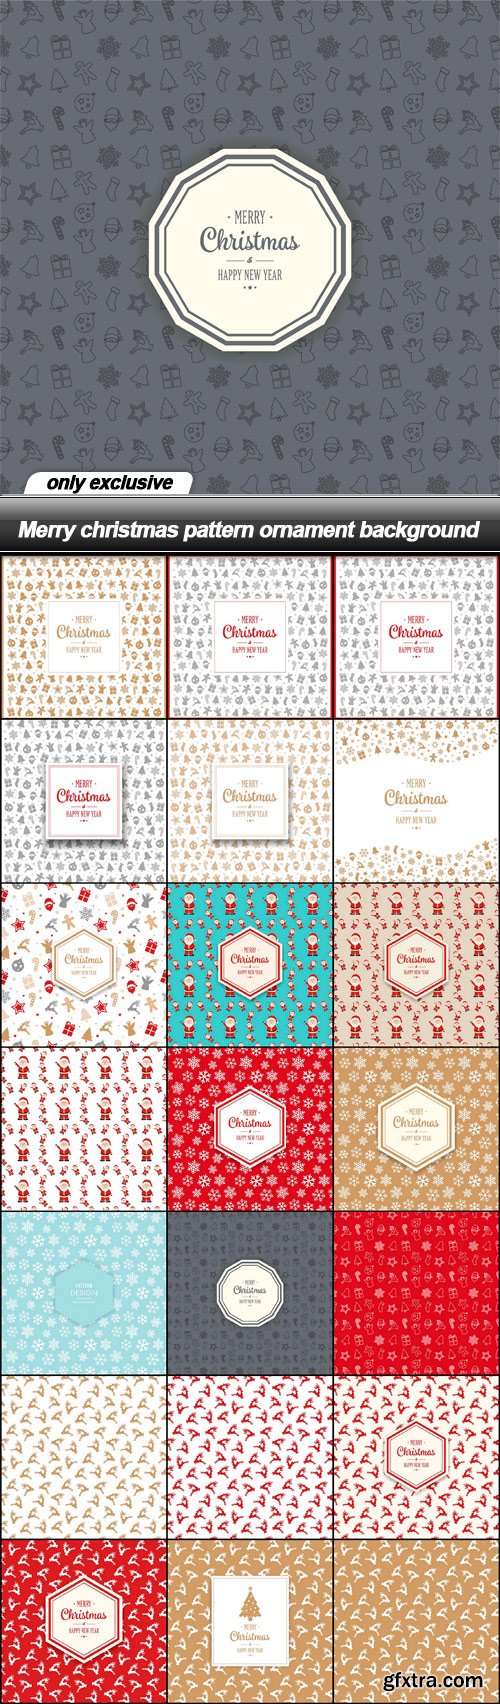 Merry christmas pattern ornament background - 21 EPS